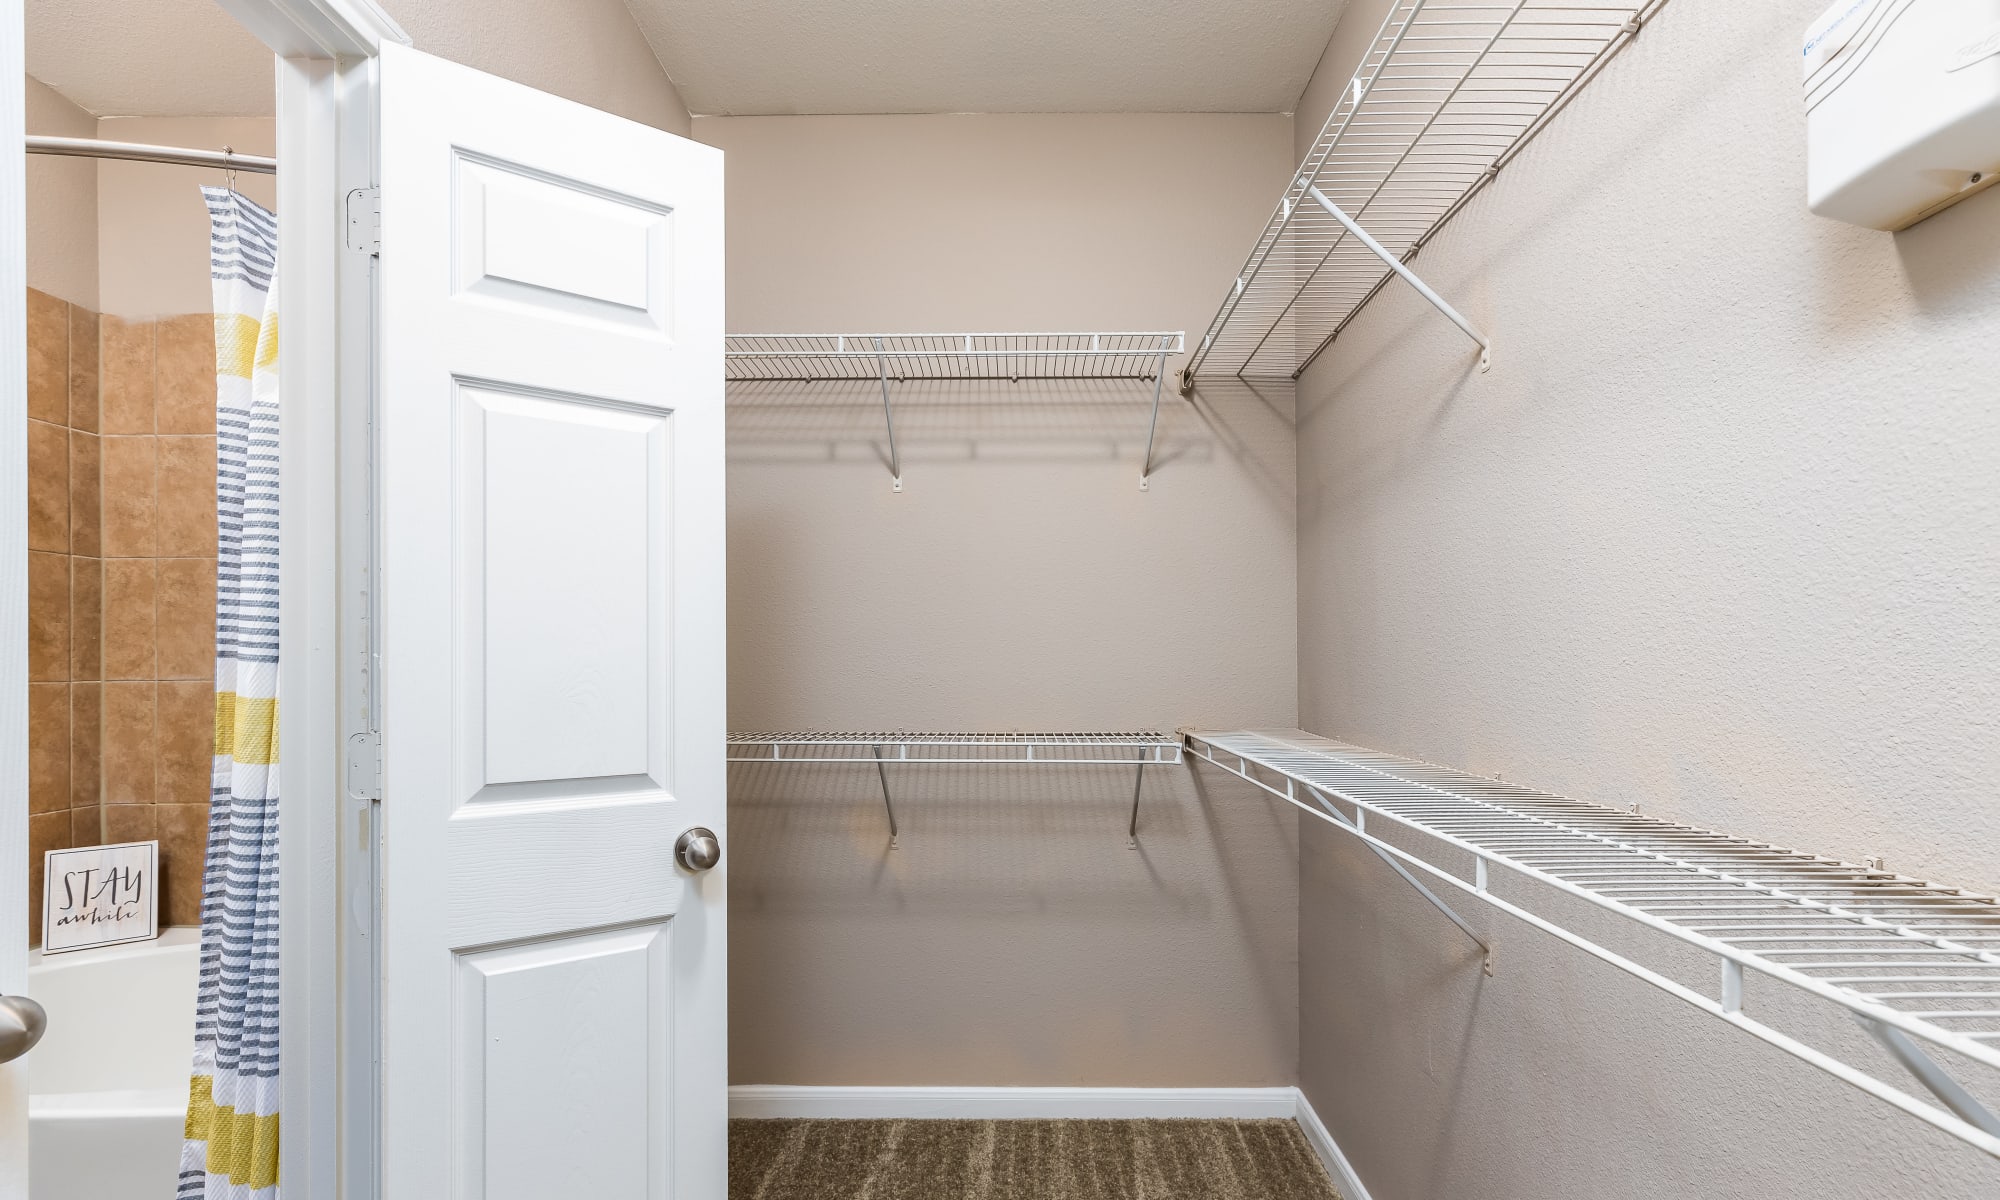 Enjoy apartments with walk-in closets at The Abbey at Grande Oaks in San Antonio, Texas